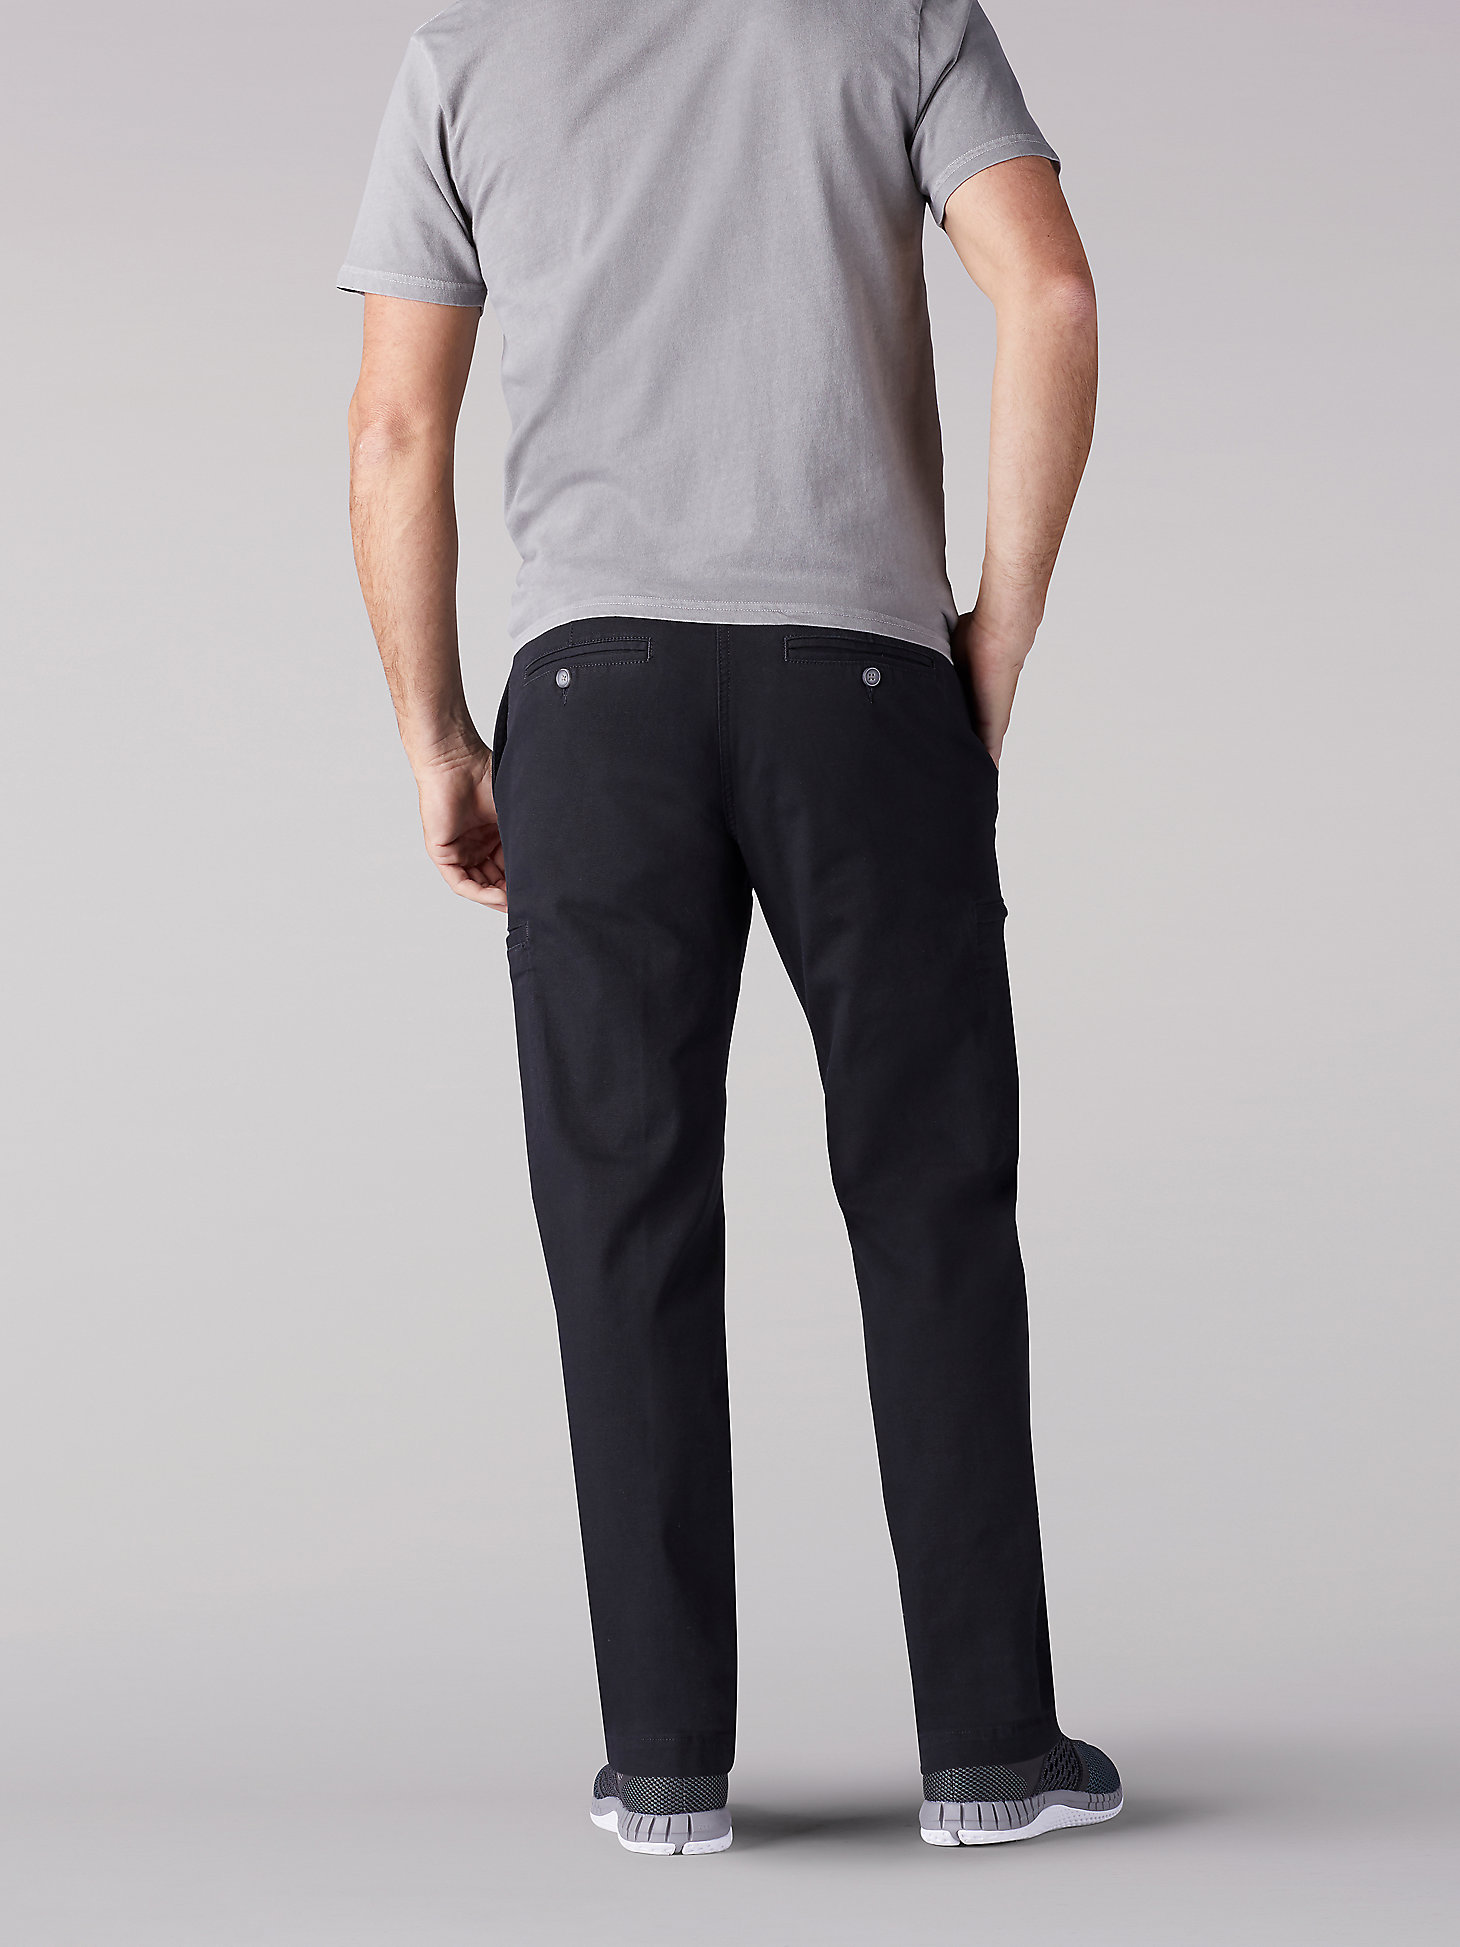 Men's Extreme Motion Straight Fit Cargo Pant (Big & Tall) in Black alternative view 1